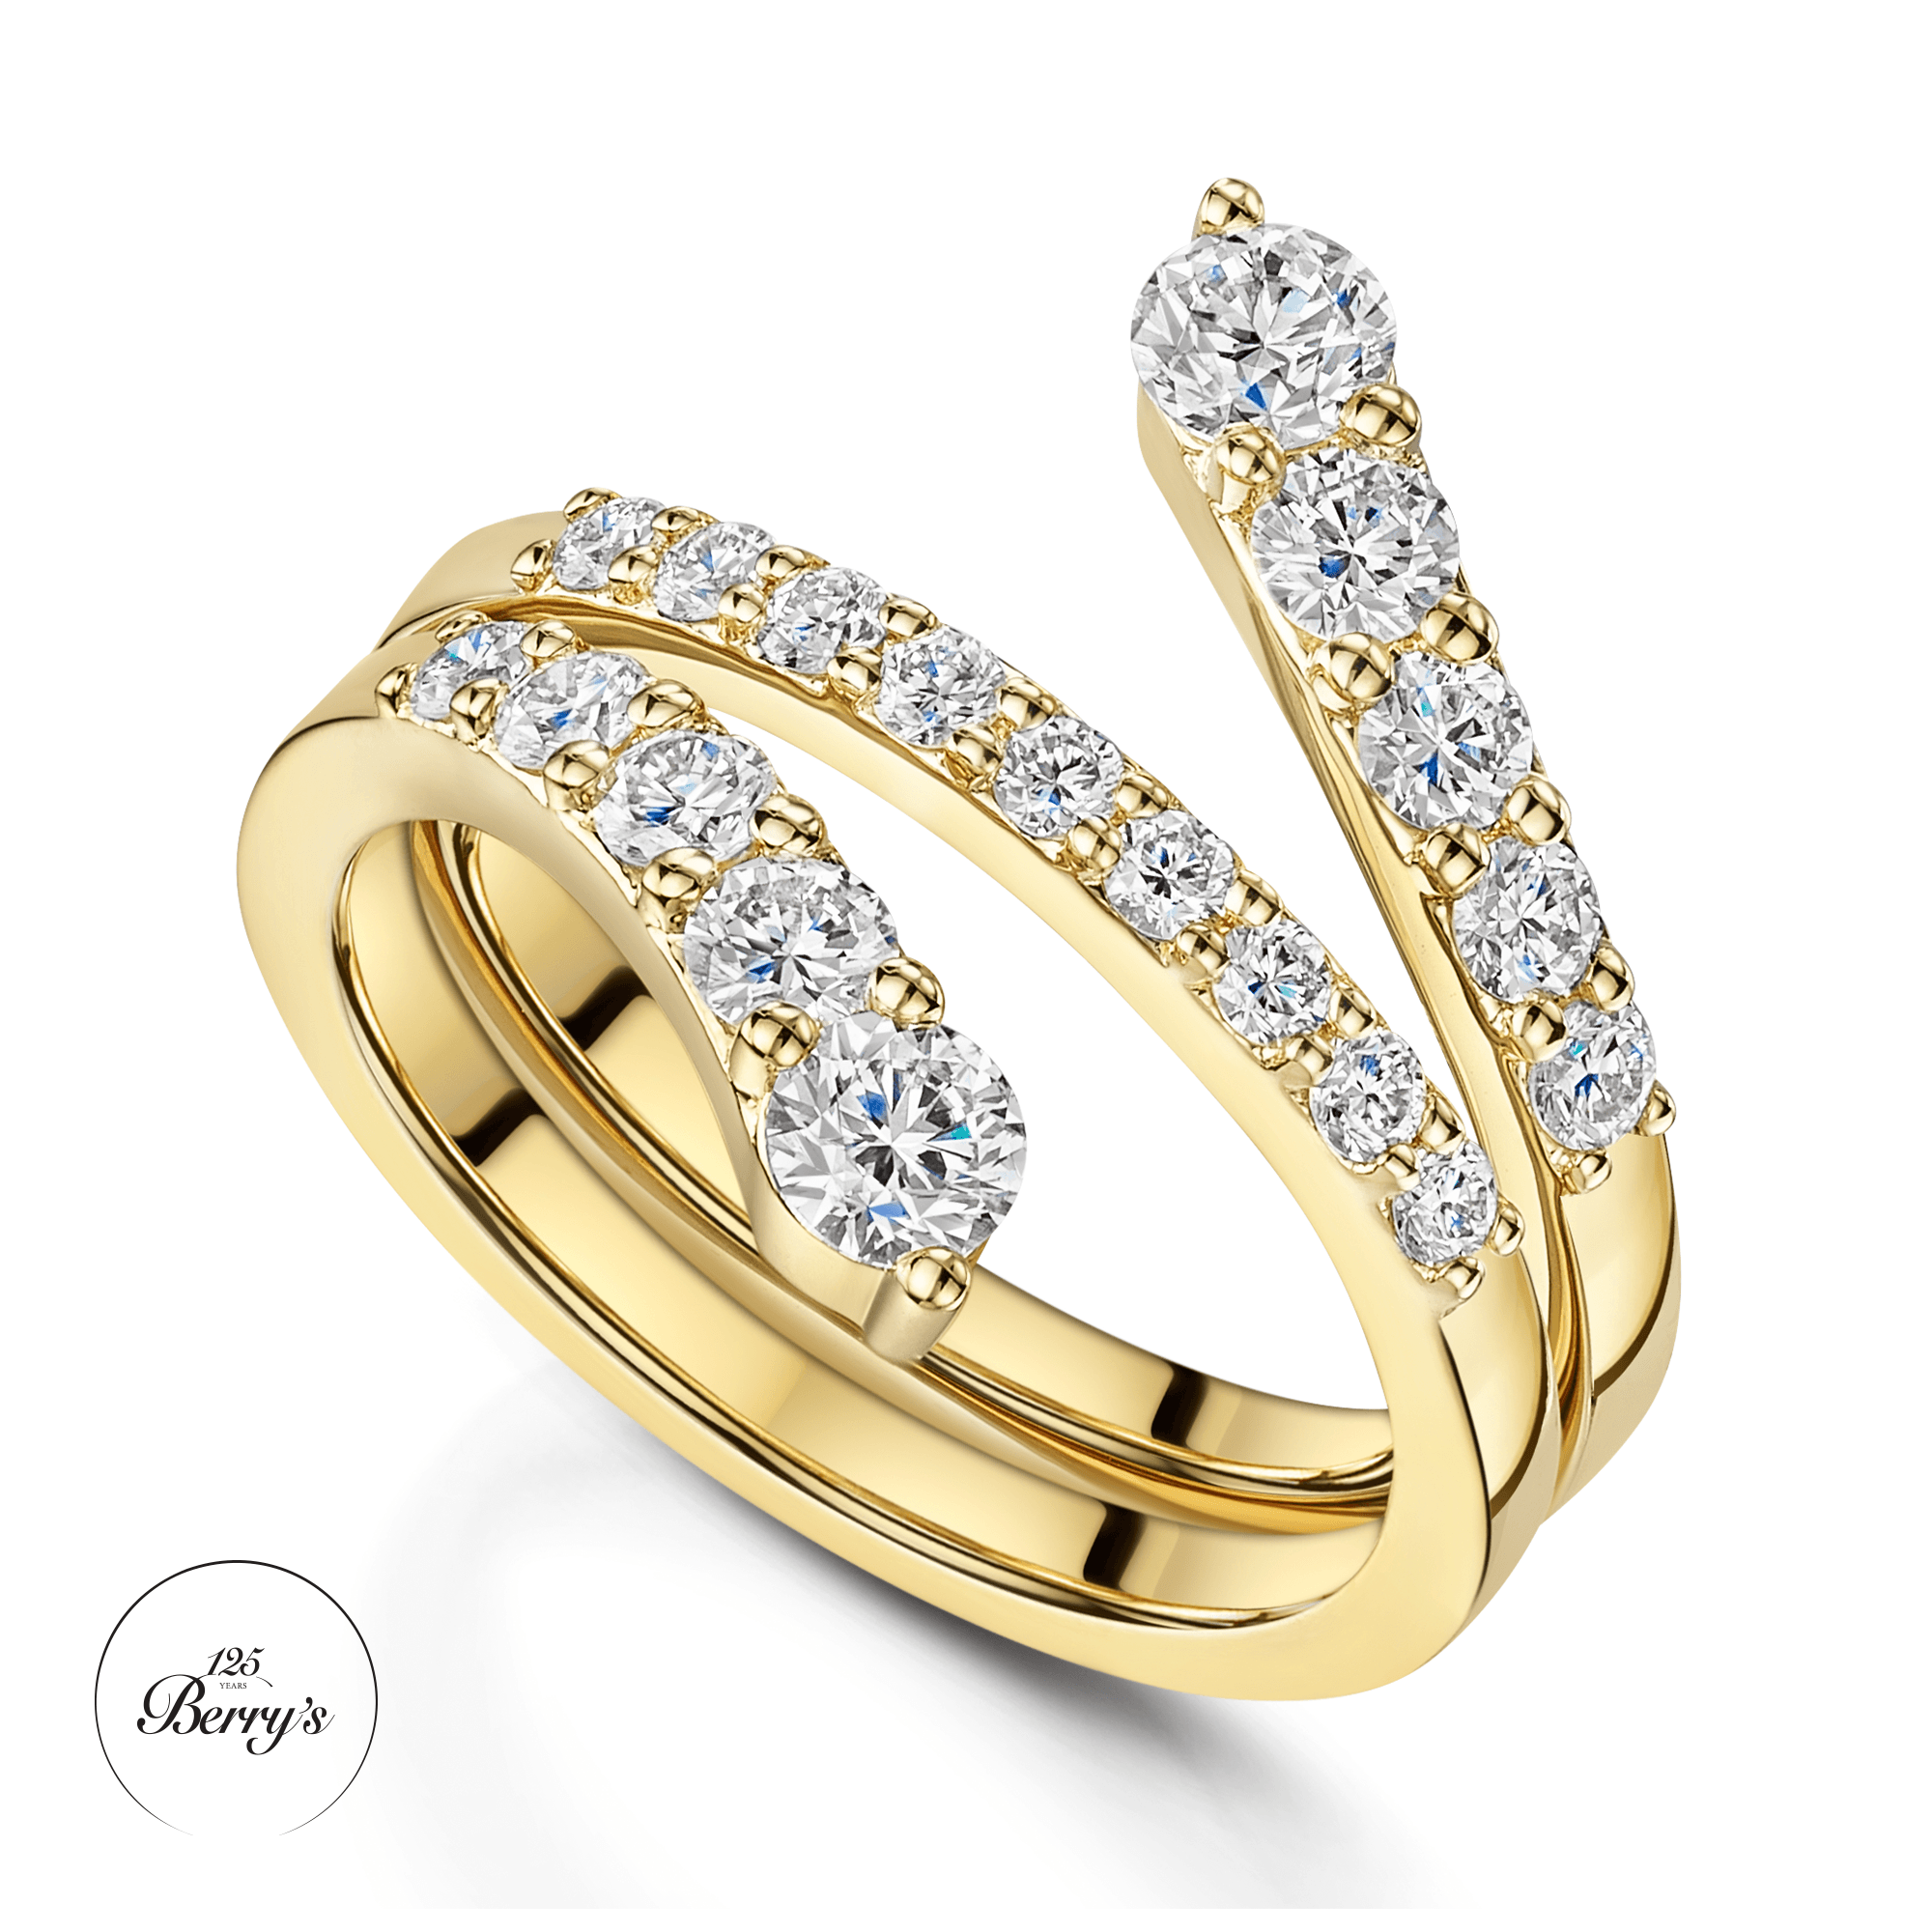 OPEIA Collection 18ct Yellow Gold Round Brilliant Cut Diamond Fancy Triple Twist Ring